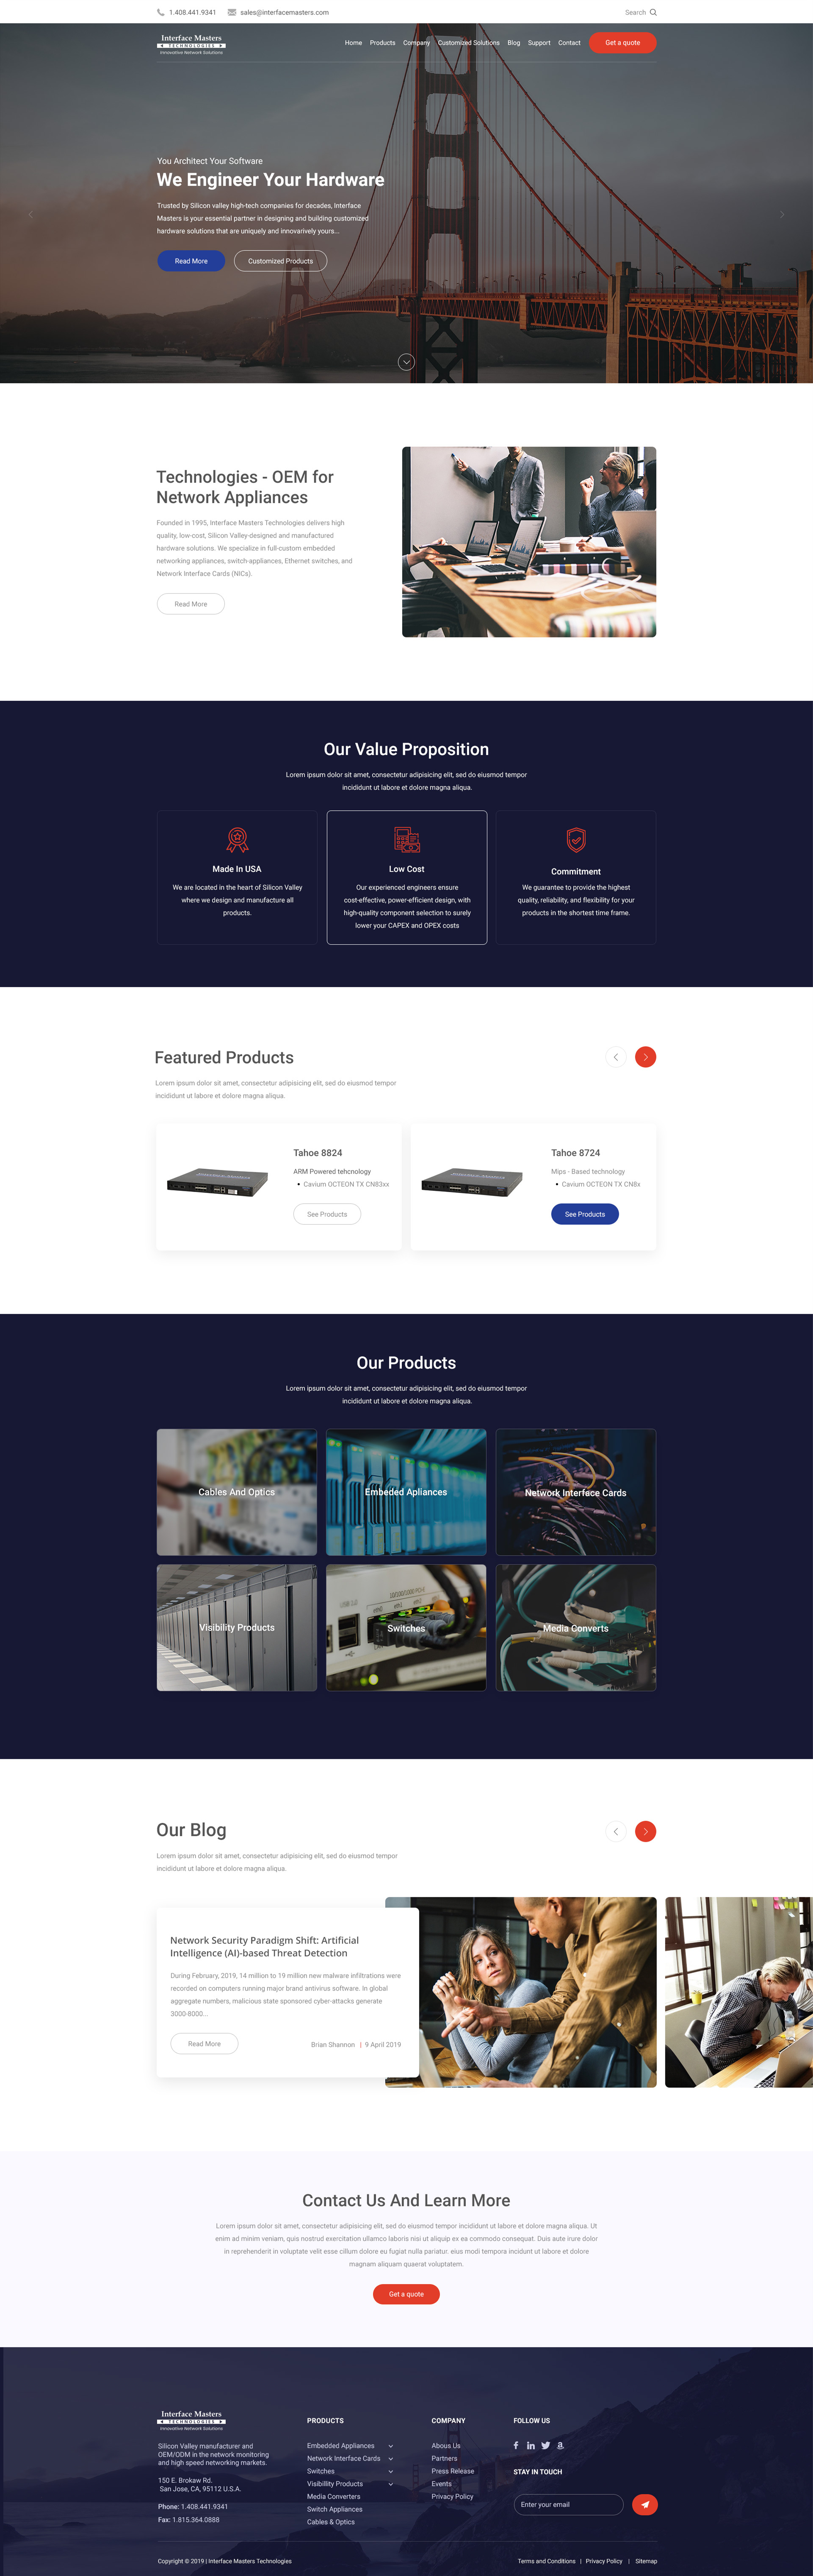 Homepage design for B2B networking tech company